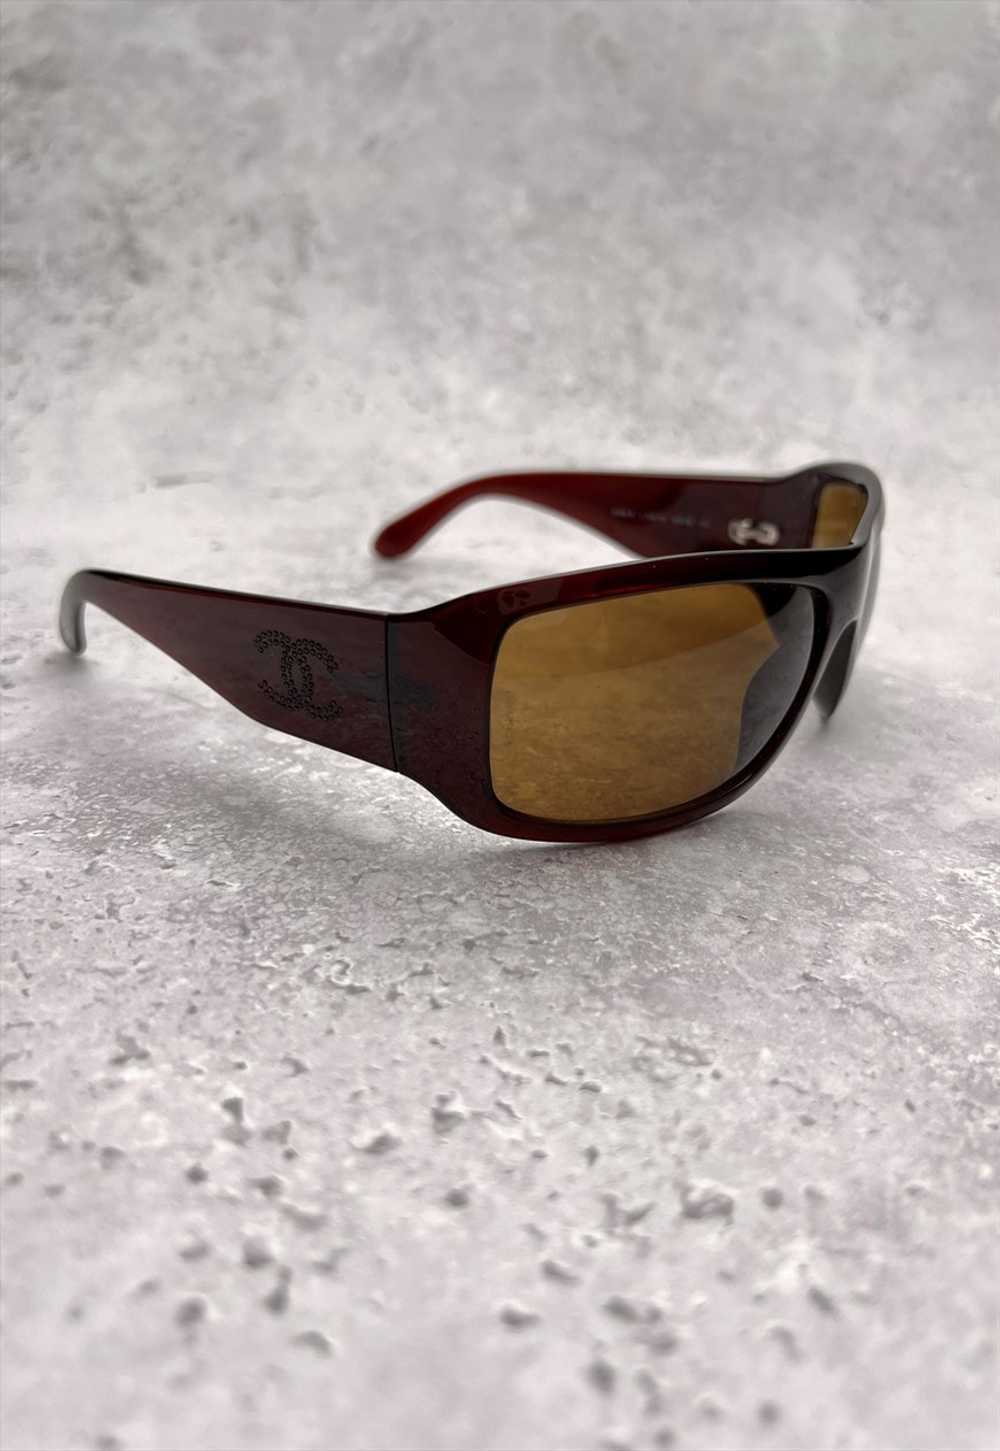 Chanel Sunglasses Authentic Burgundy Brown Crysta… - image 5